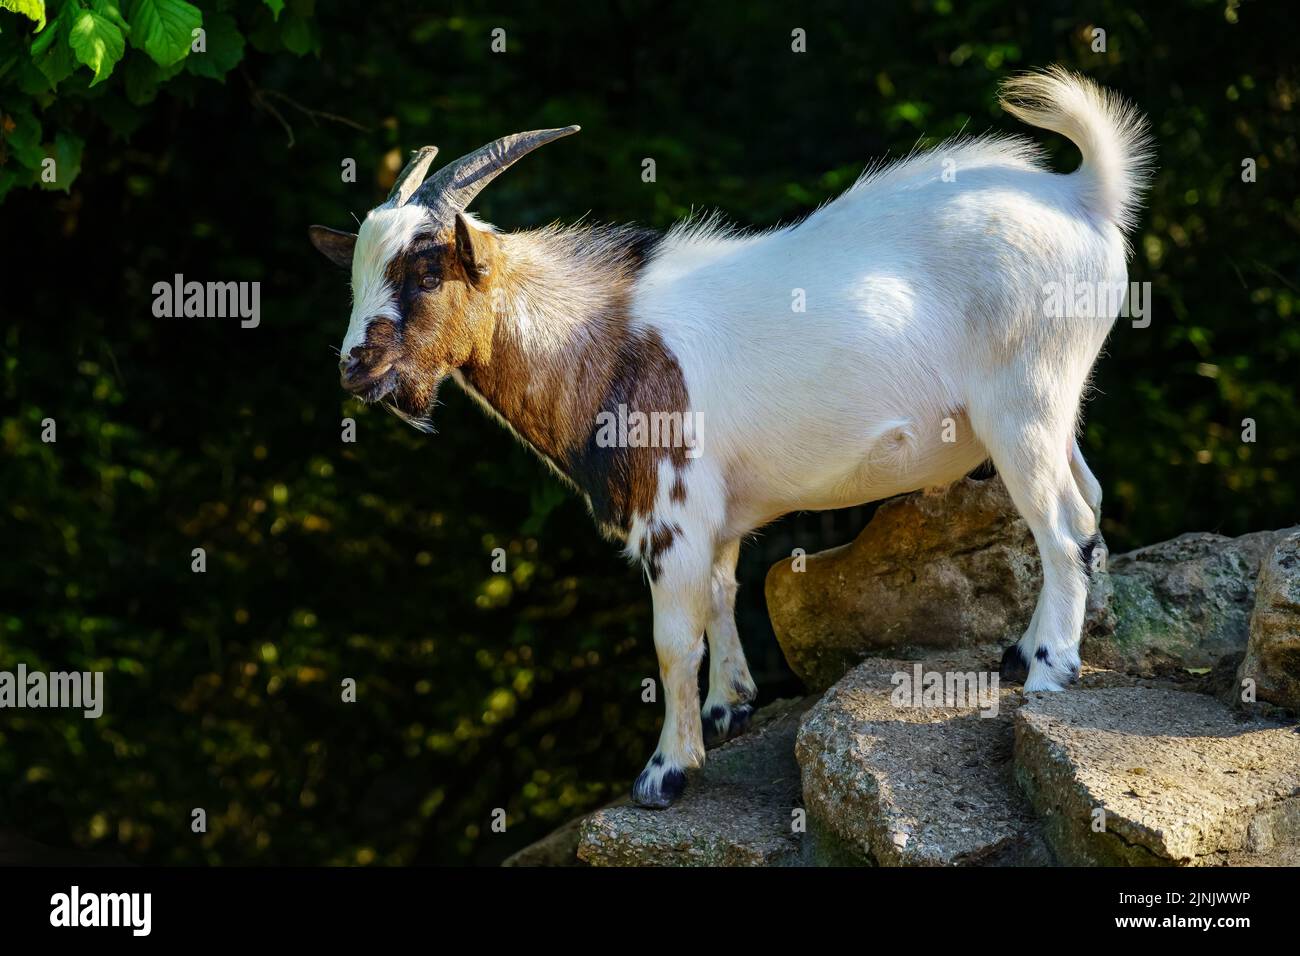 Colorful goat climbing some rocks against a green background of vegetation. Stock Photo